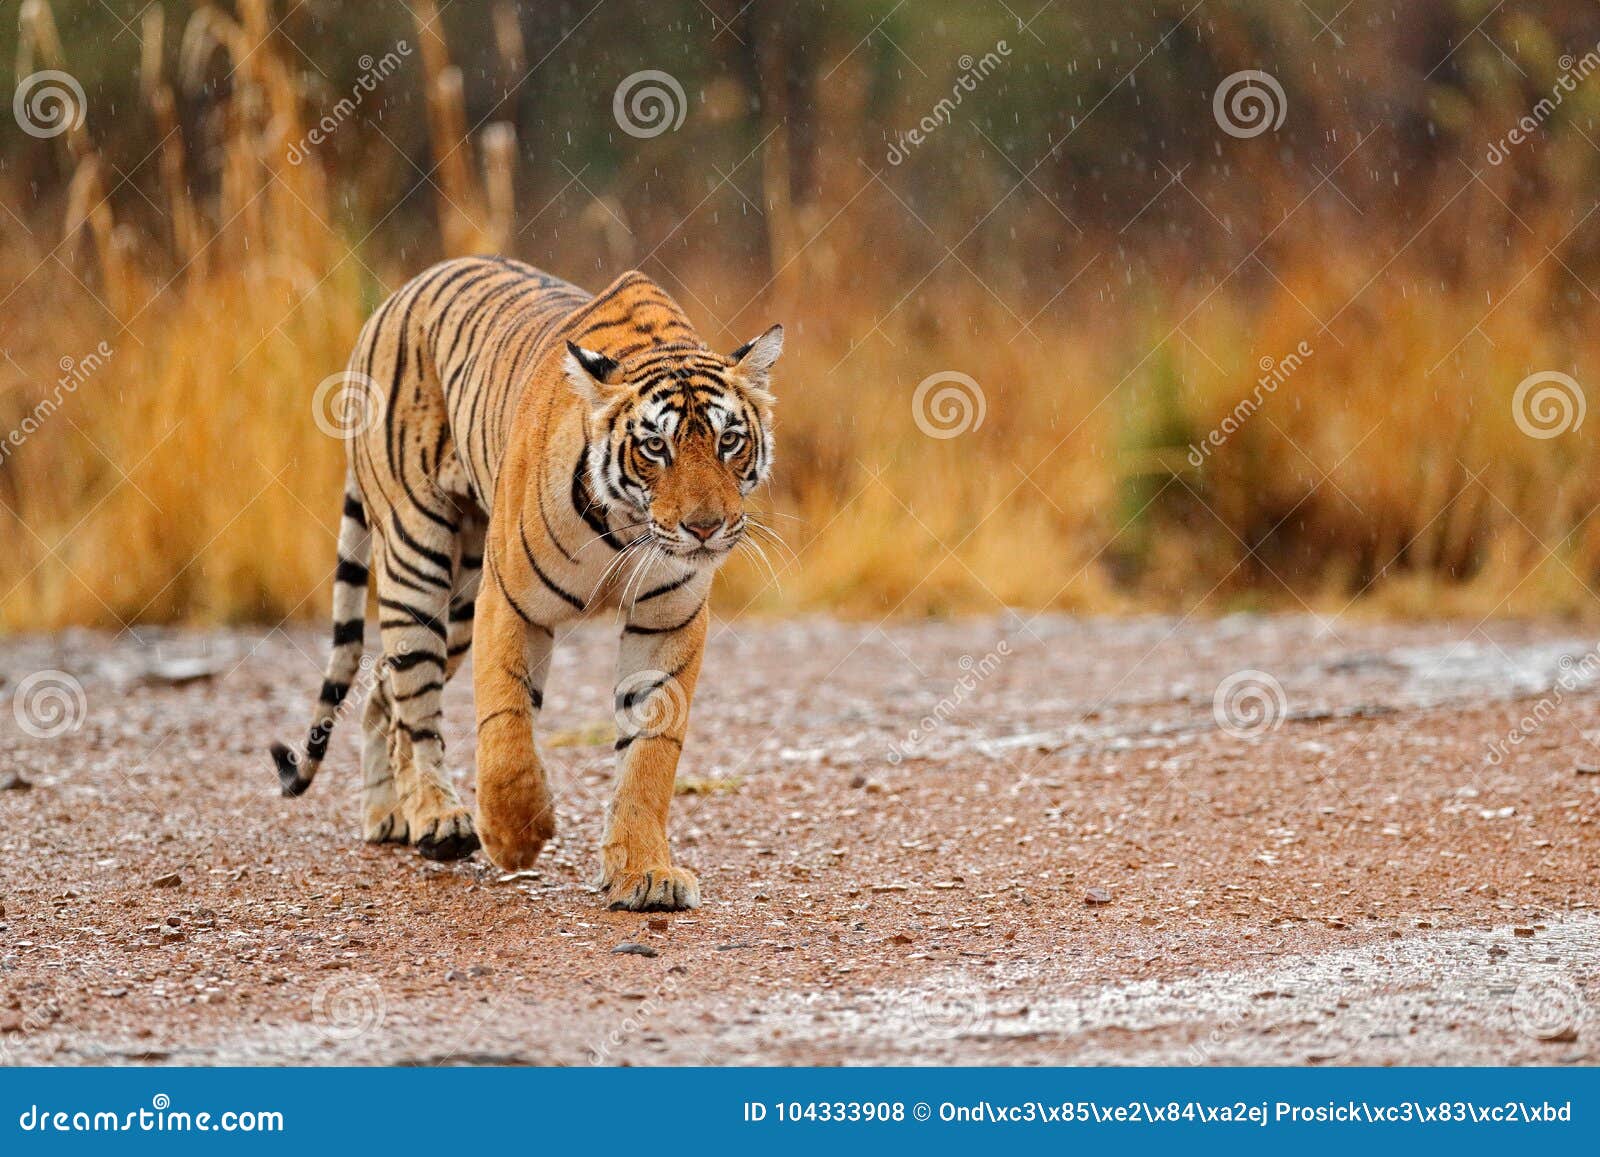 tiger walking on the gravel road. wildlife india. indian tiger with first rain, wild animal in the nature habitat, ranthambore, in